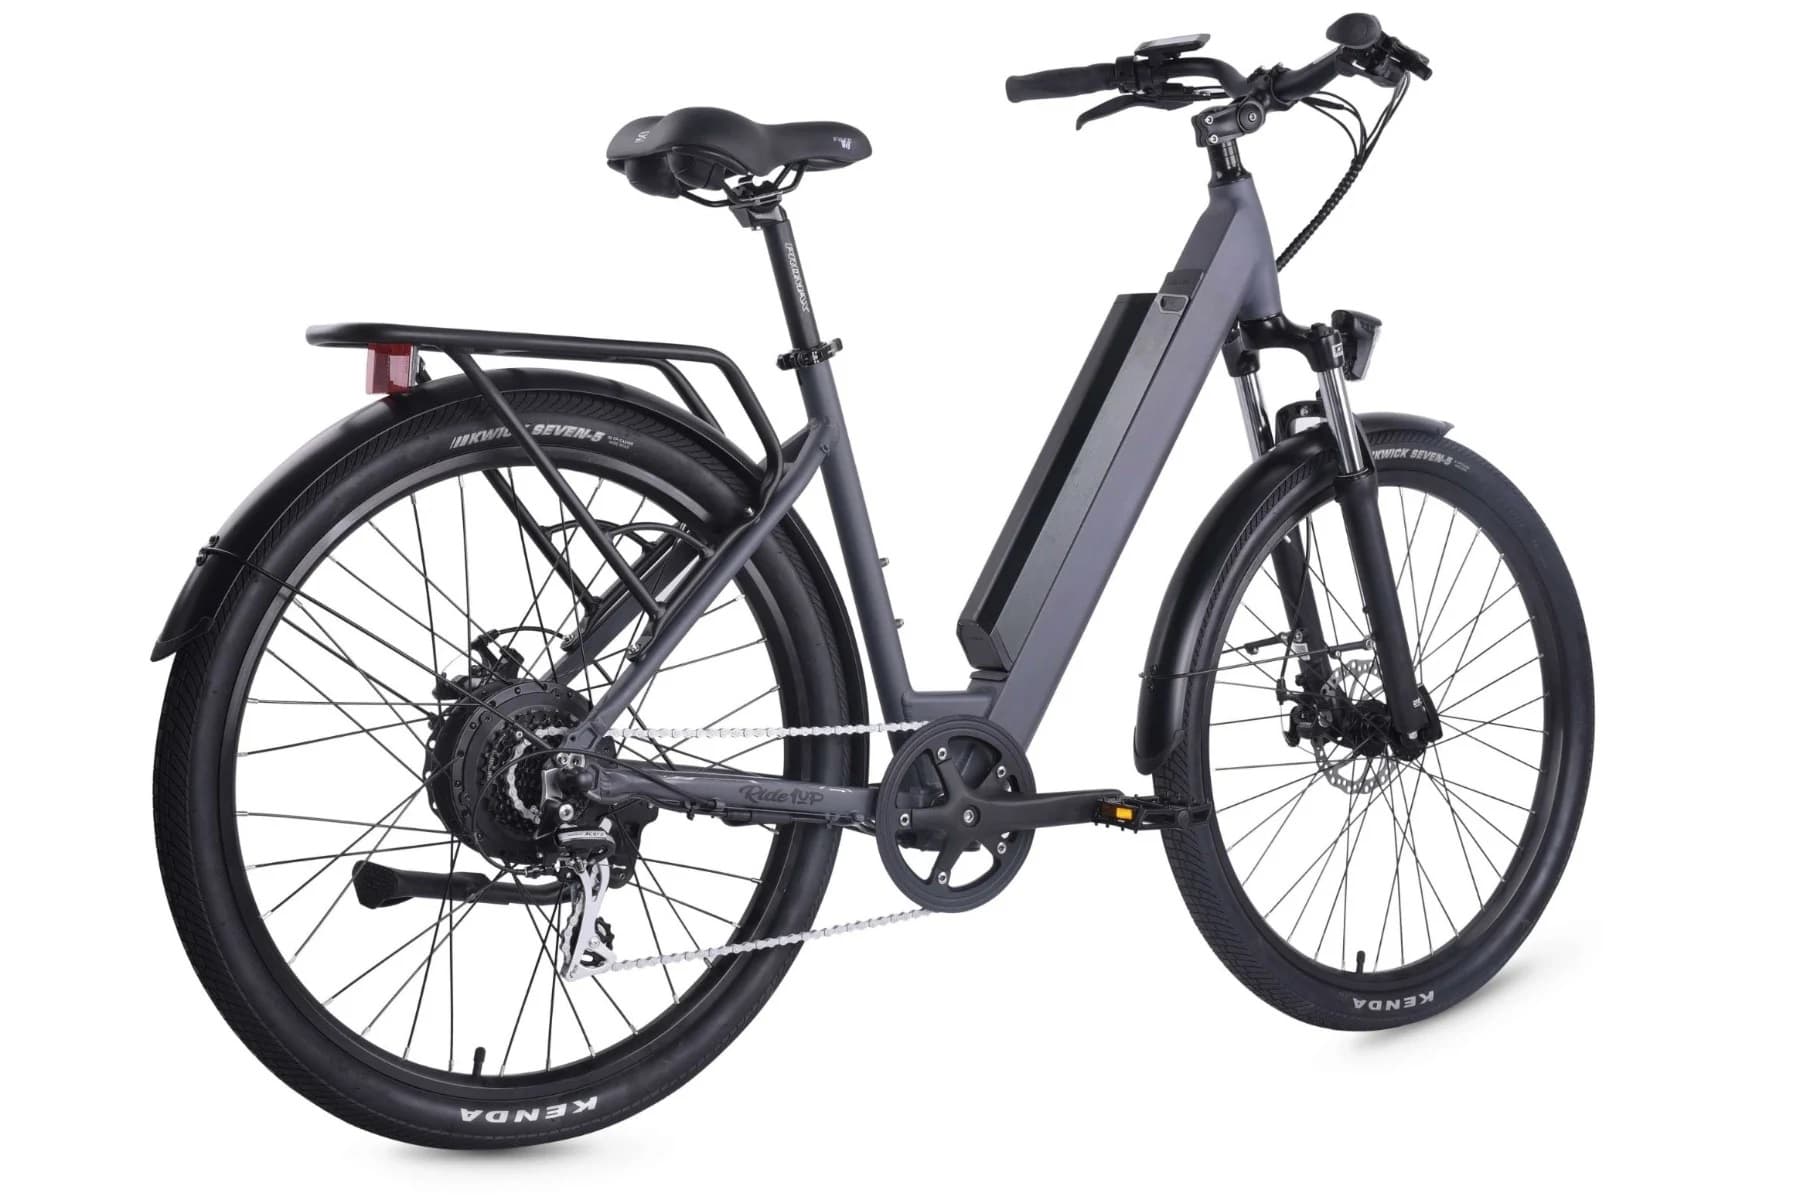 Ride1Up 500 Series Review - Frame